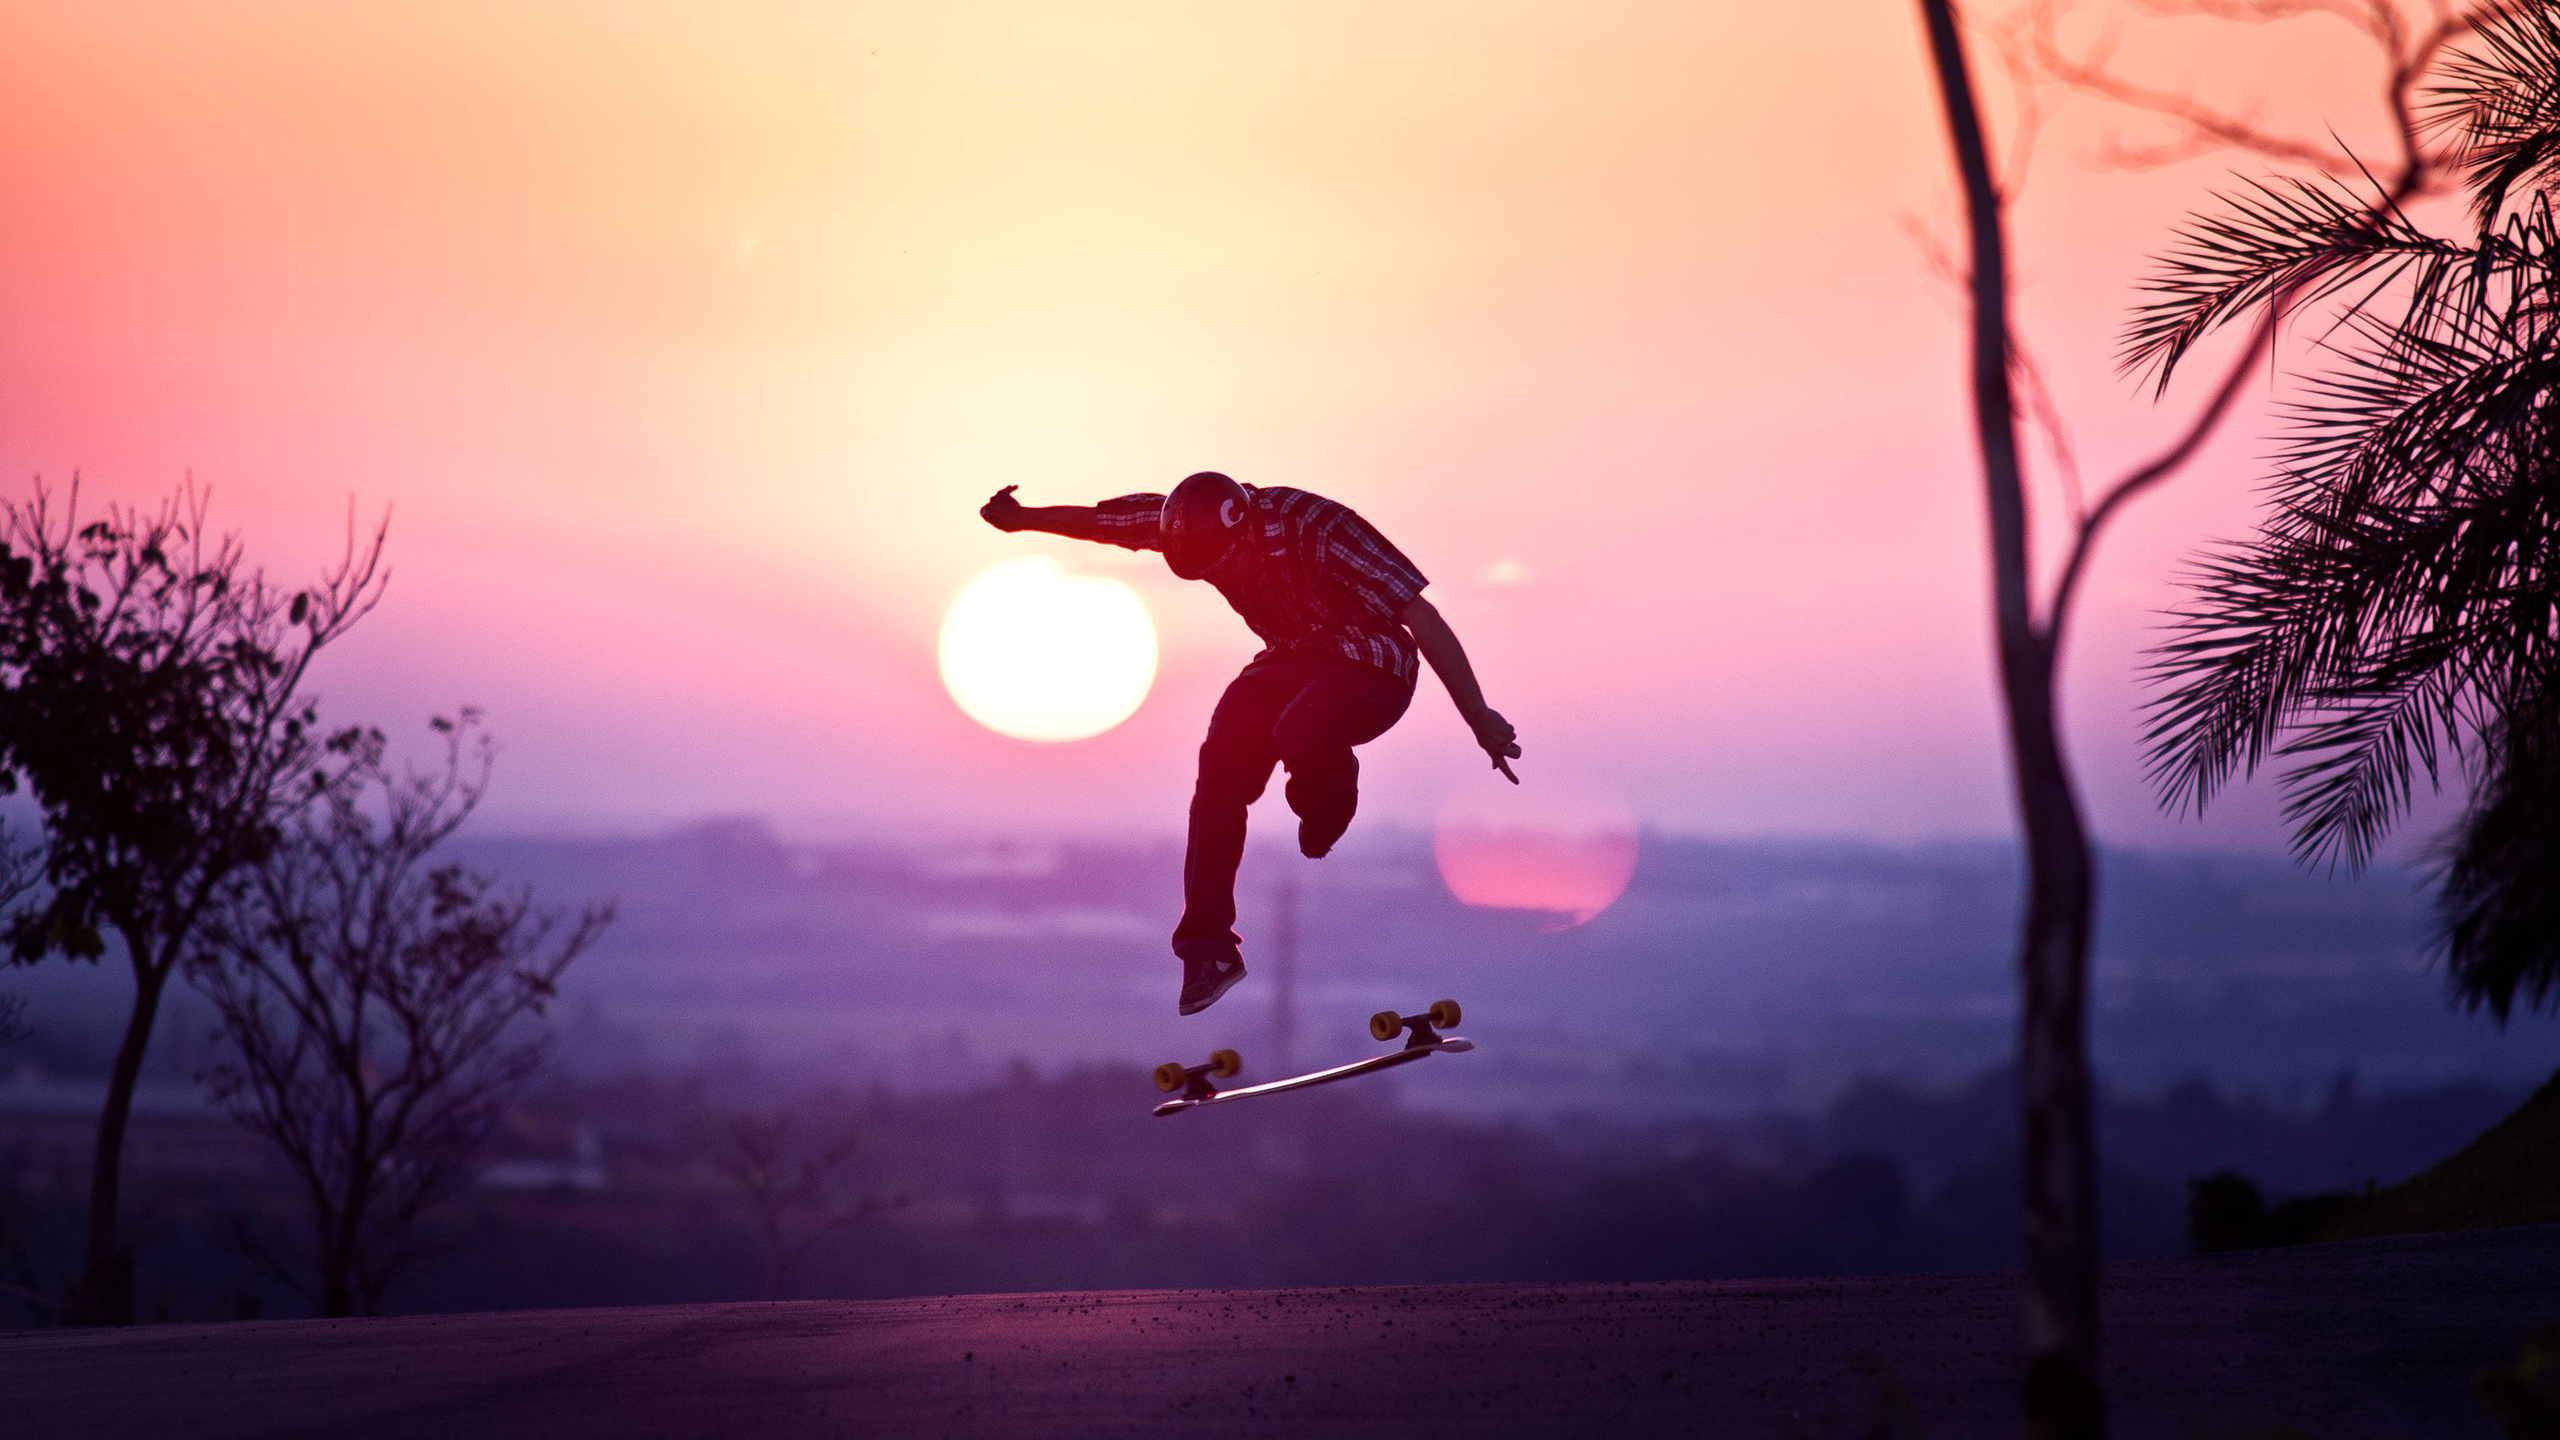 Skateboarding: Street action sport in the sunset, Recreational activity and extreme adventure sport. 2560x1440 HD Background.